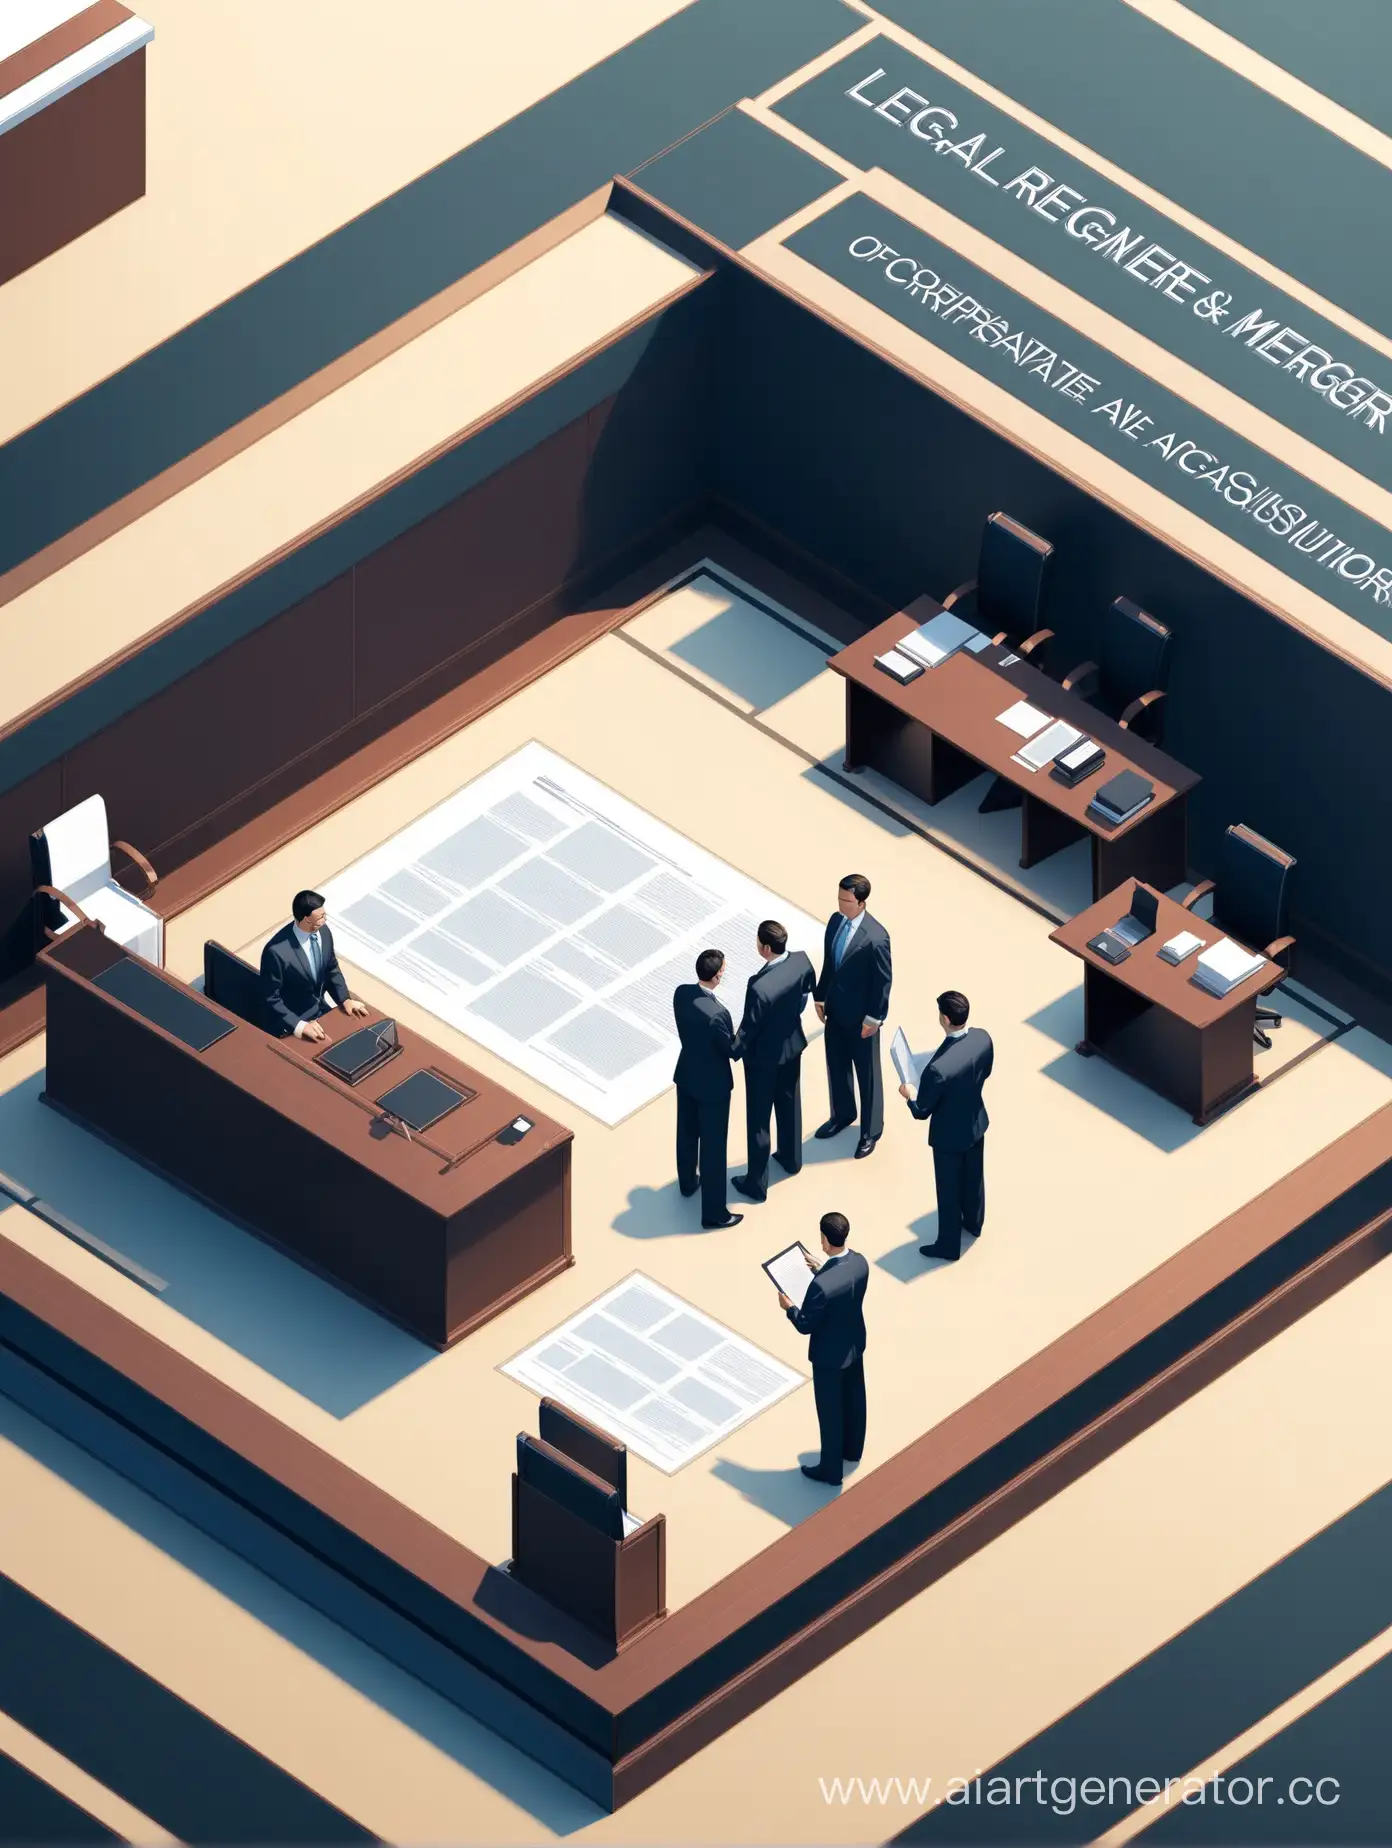 Professional-Presentation-of-Corporate-Mergers-and-Acquisitions-Isometric-View-in-Modern-Business-Concept